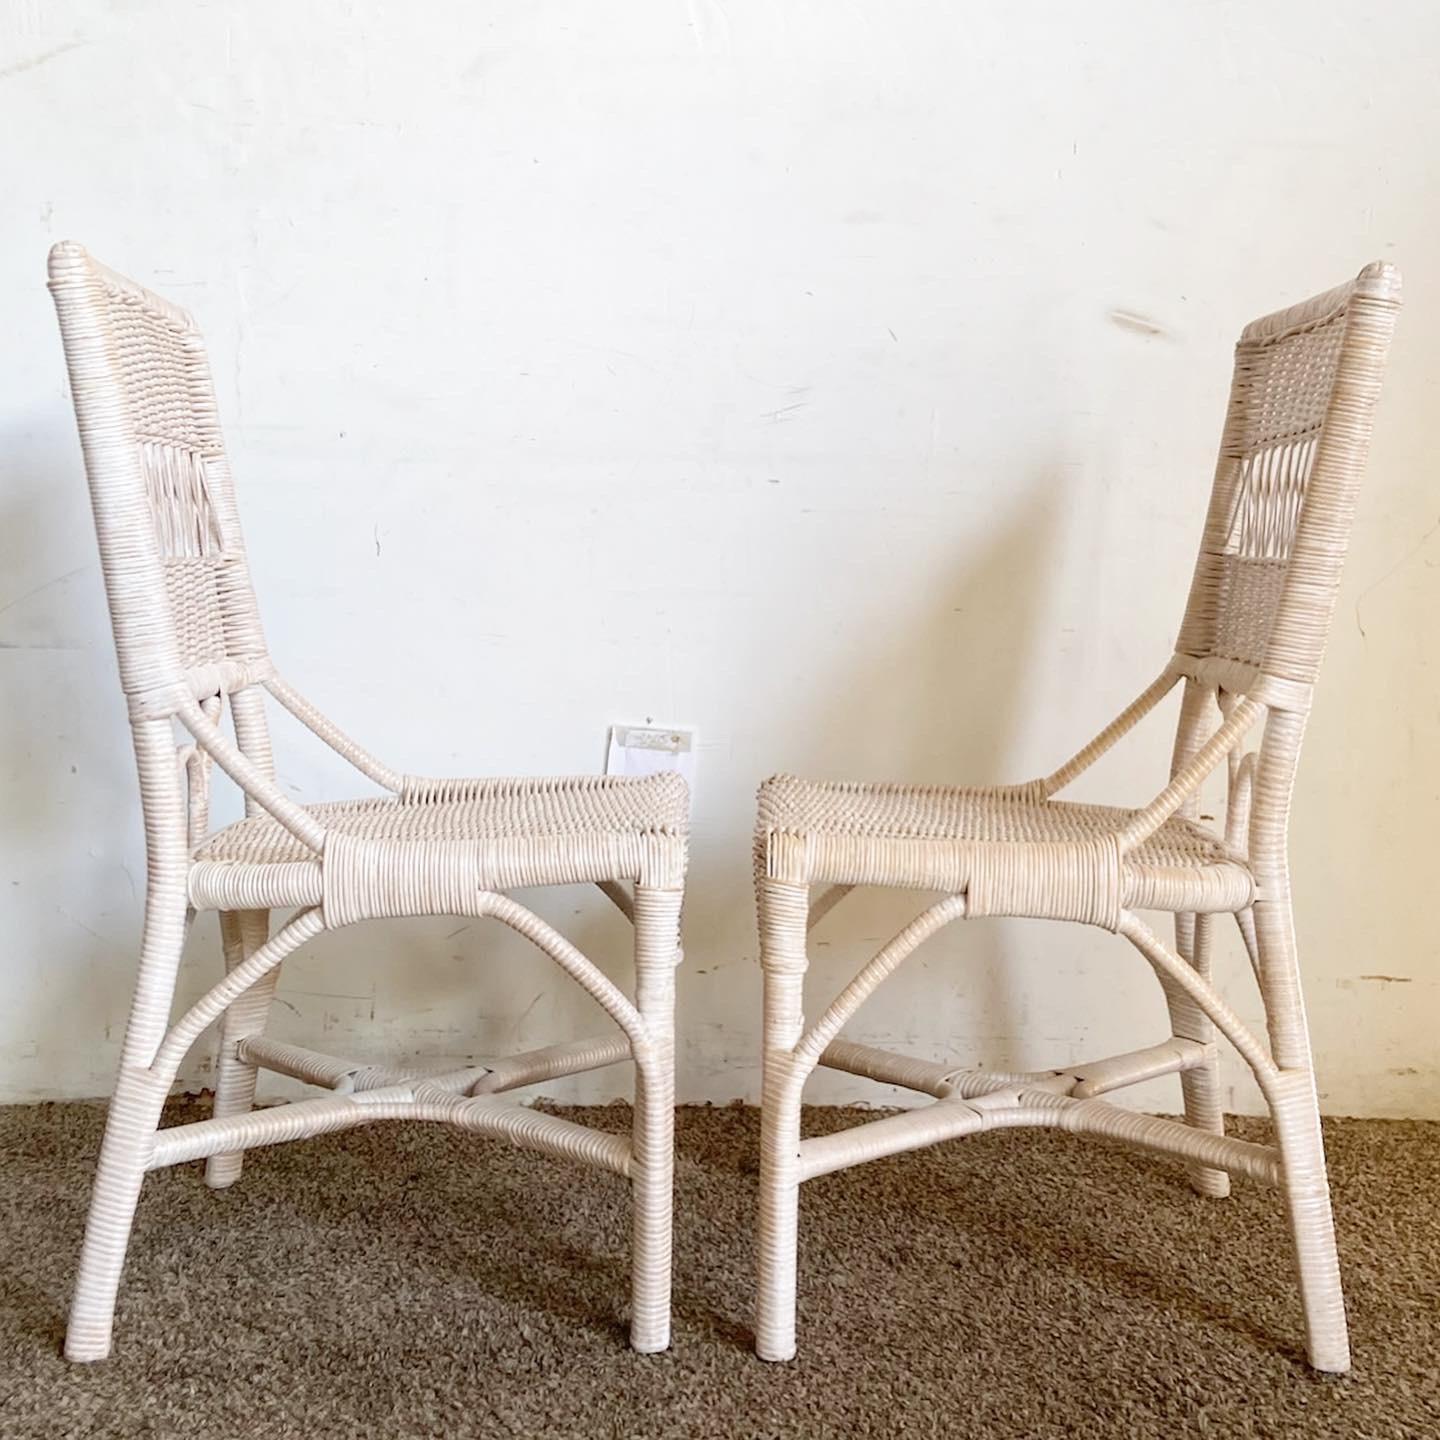 Introduce a touch of bohemian elegance with the Boho Chic White Washed Wicker Rattan Side Chairs. This pair, crafted in wicker and rattan, boasts a timeless white-washed finish. Their intricate detailing and textured appeal make them a blend of